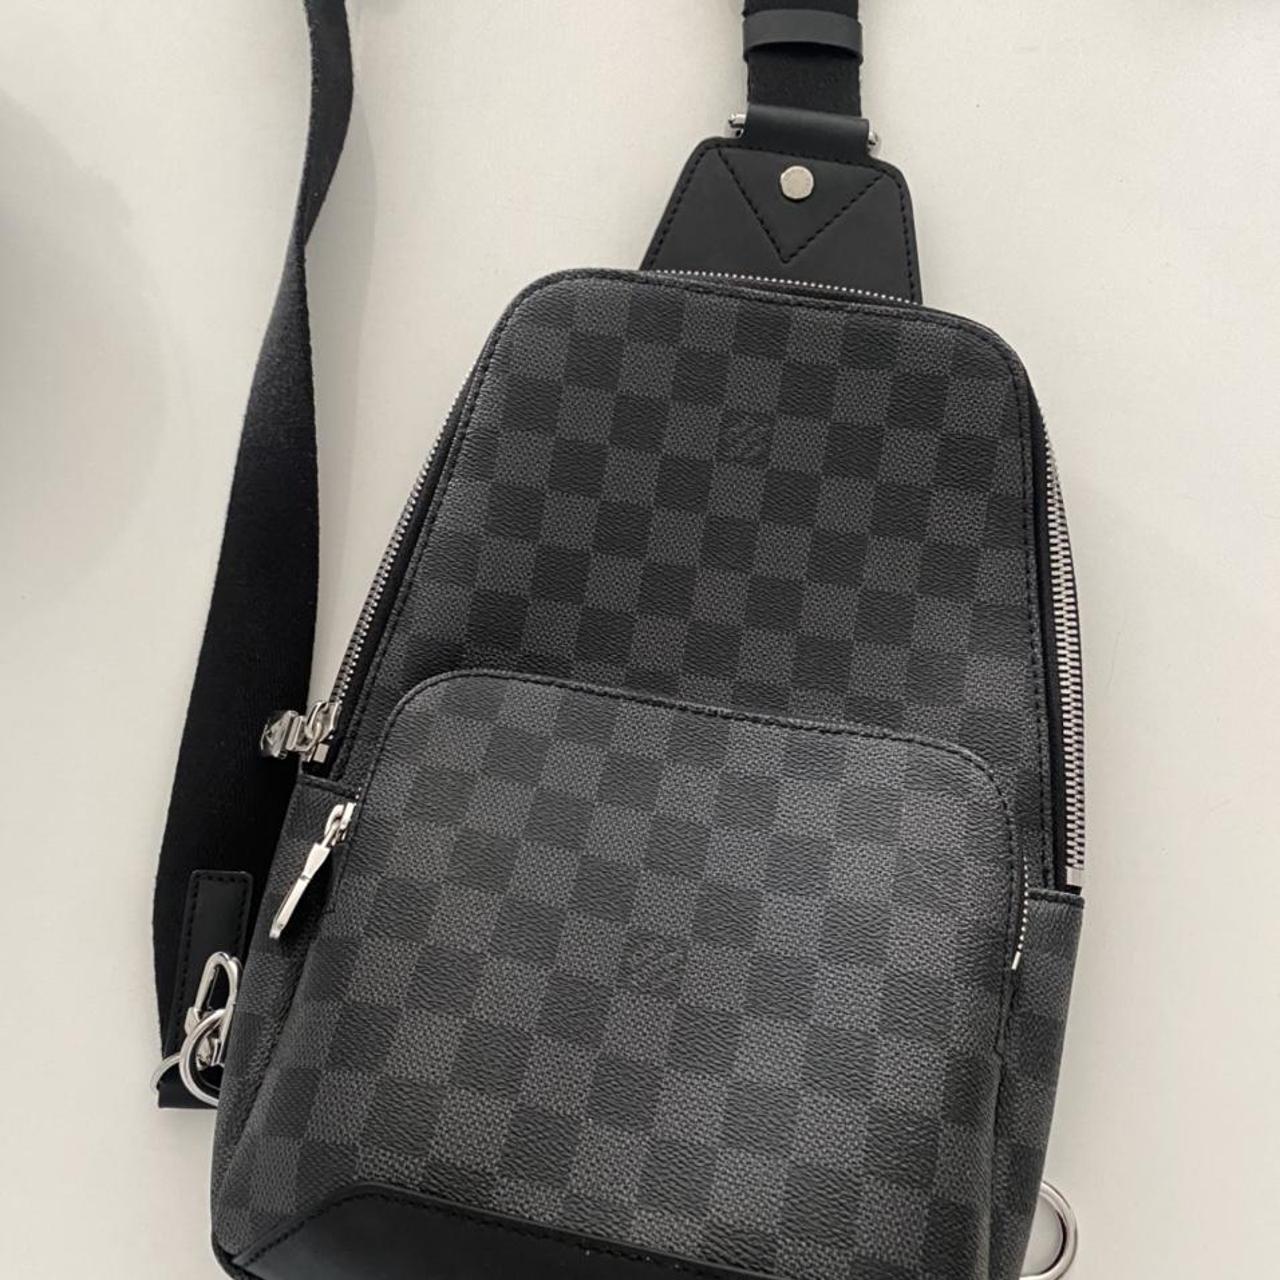 LV sling bag purchased in Paris a year ago, only... - Depop